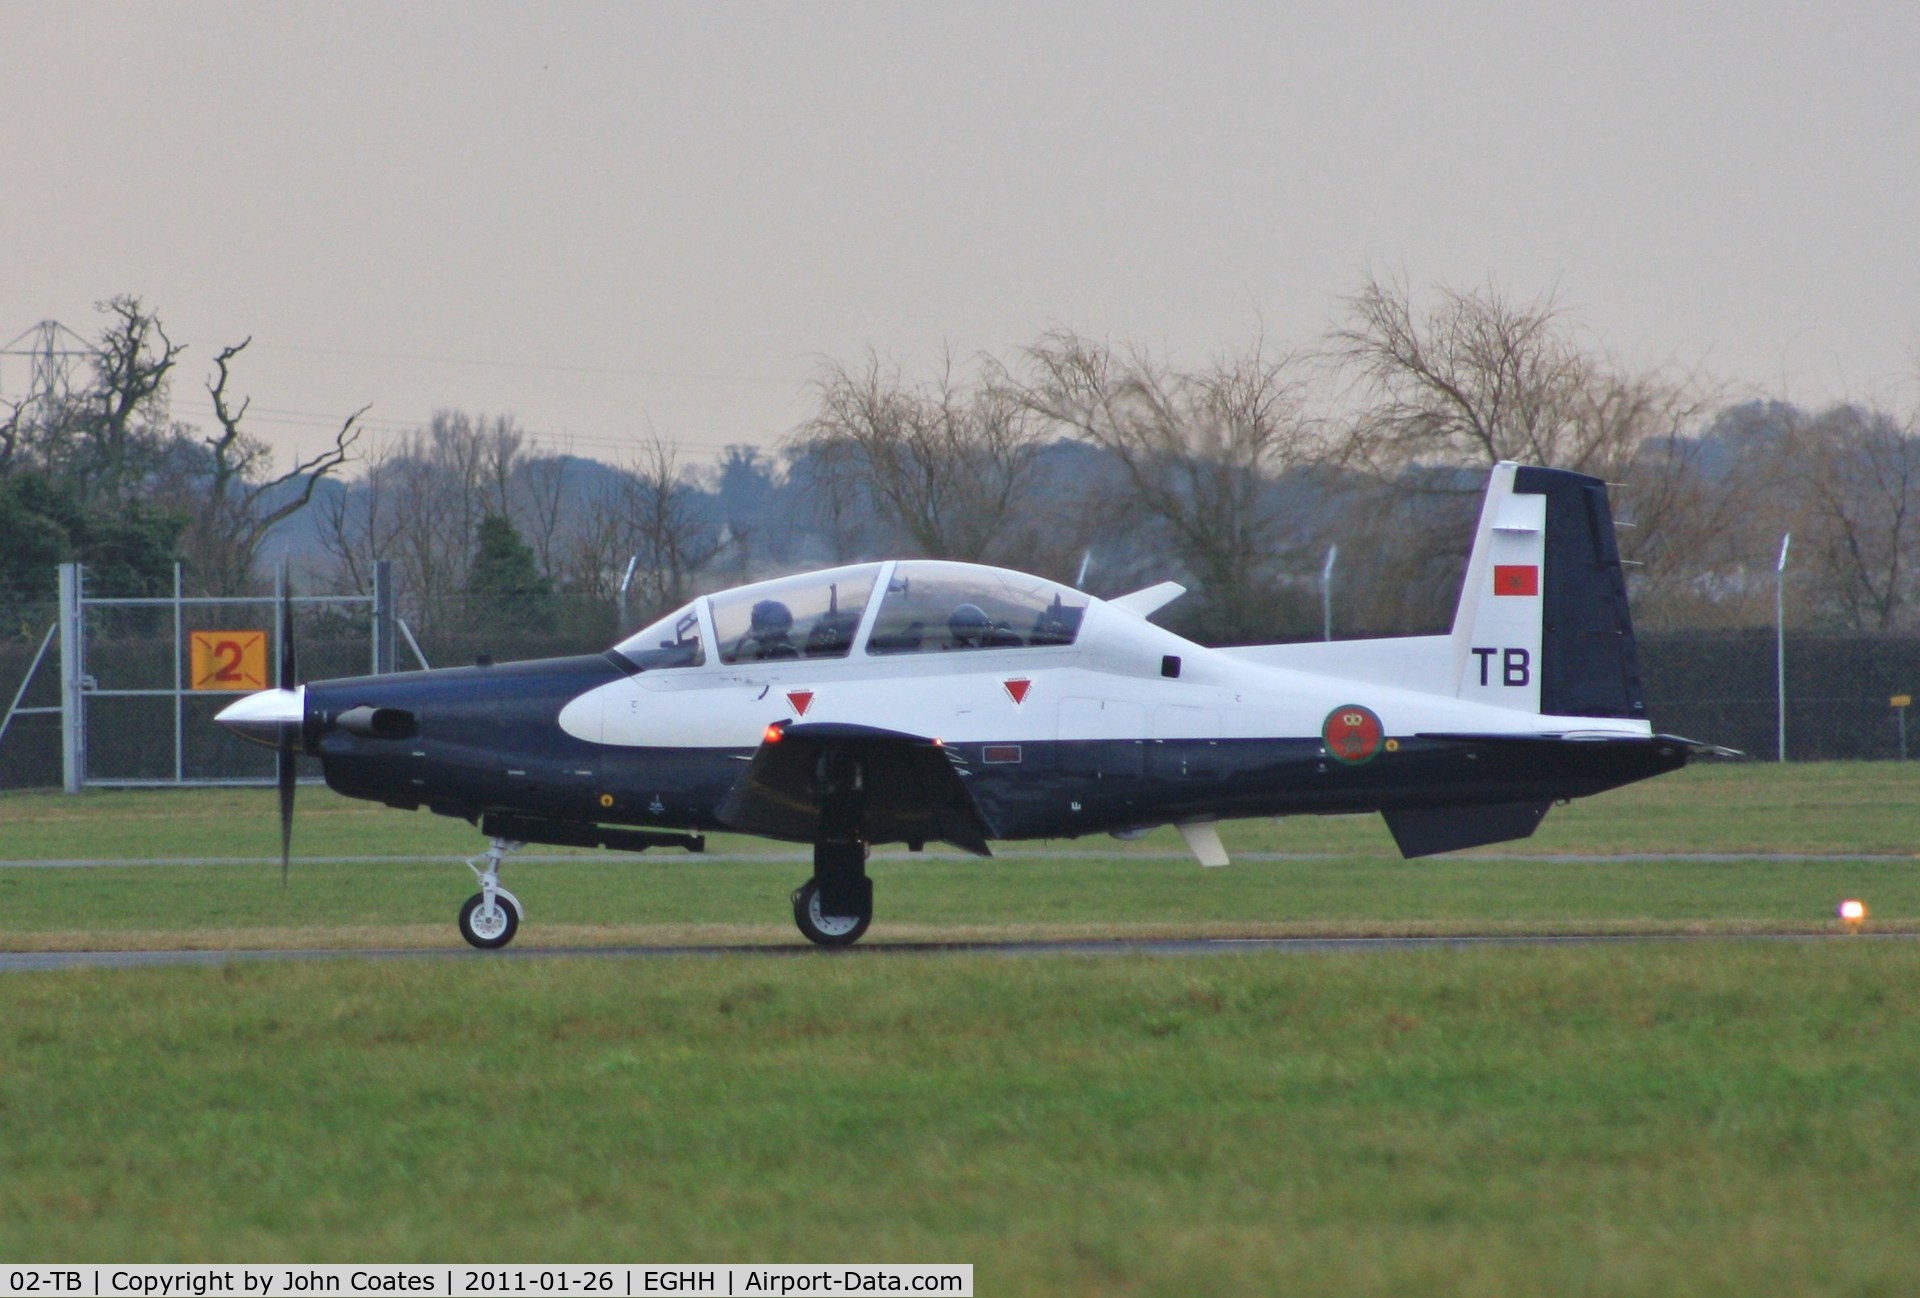 02-TB, 2010 Raytheon T-6C Texan II C/N PM-2, Departing on delivery